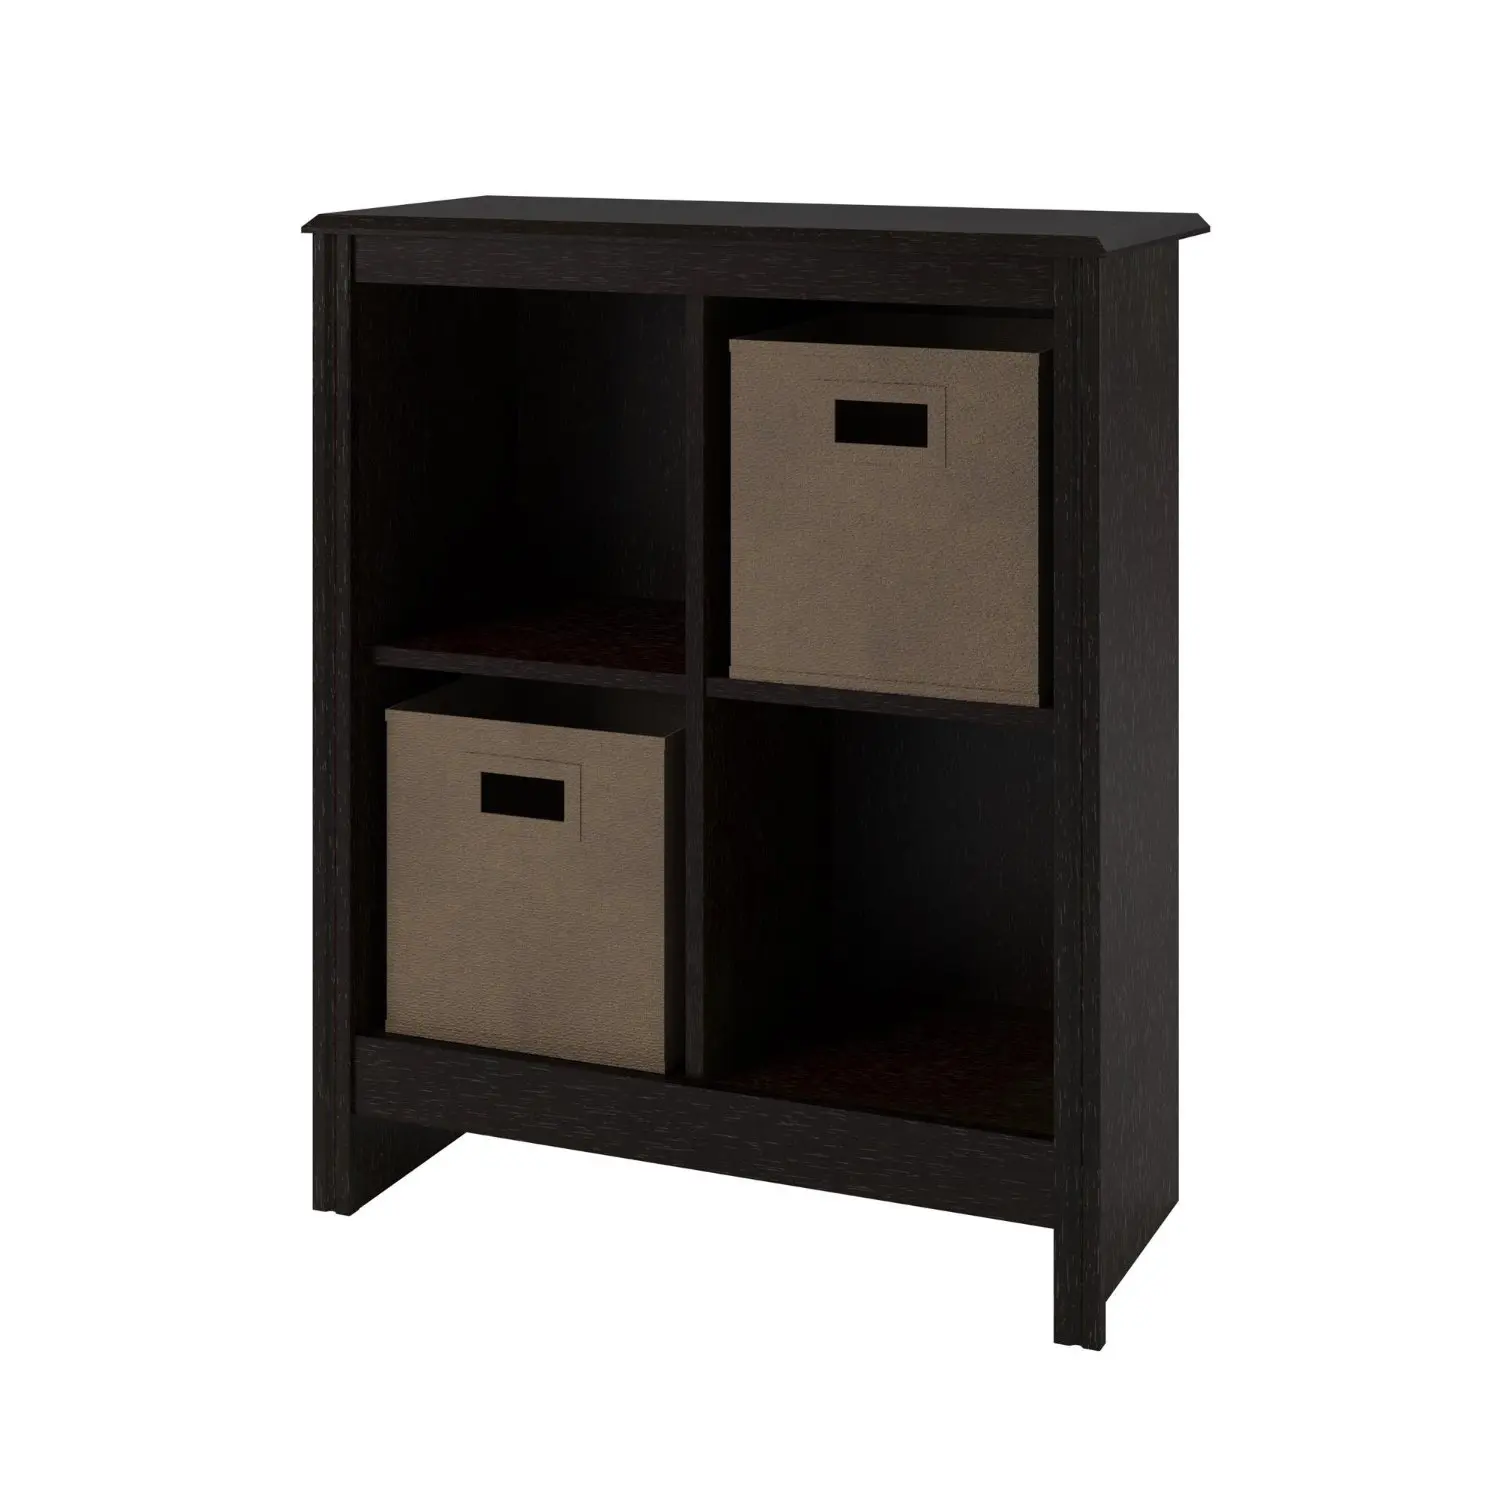 Buy Ameriwood 4 Cube Cubby Bookcase With 2 Storage Bins Black